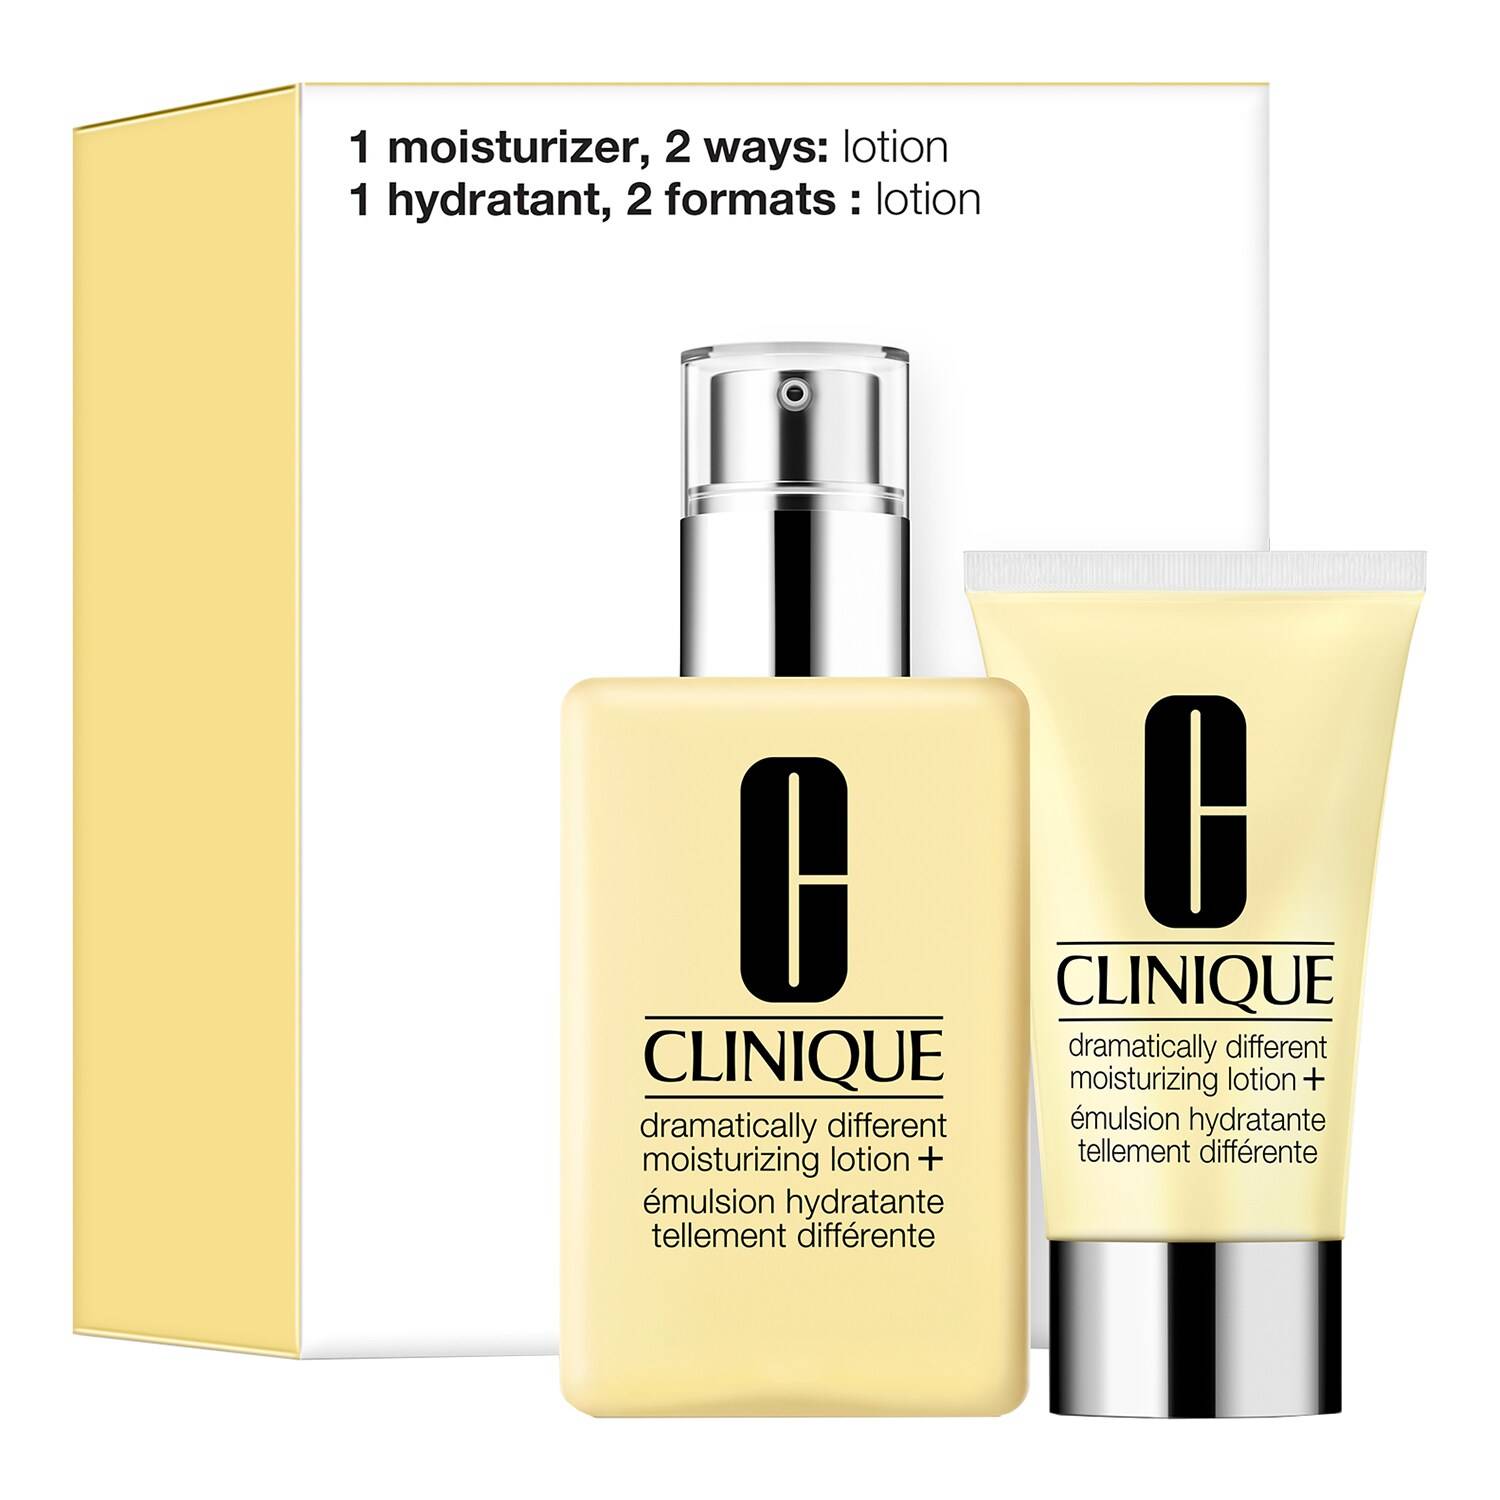 CLINIQUE Dramatically Different Moisturizing Lotion+ Duo Skincare Gift Set